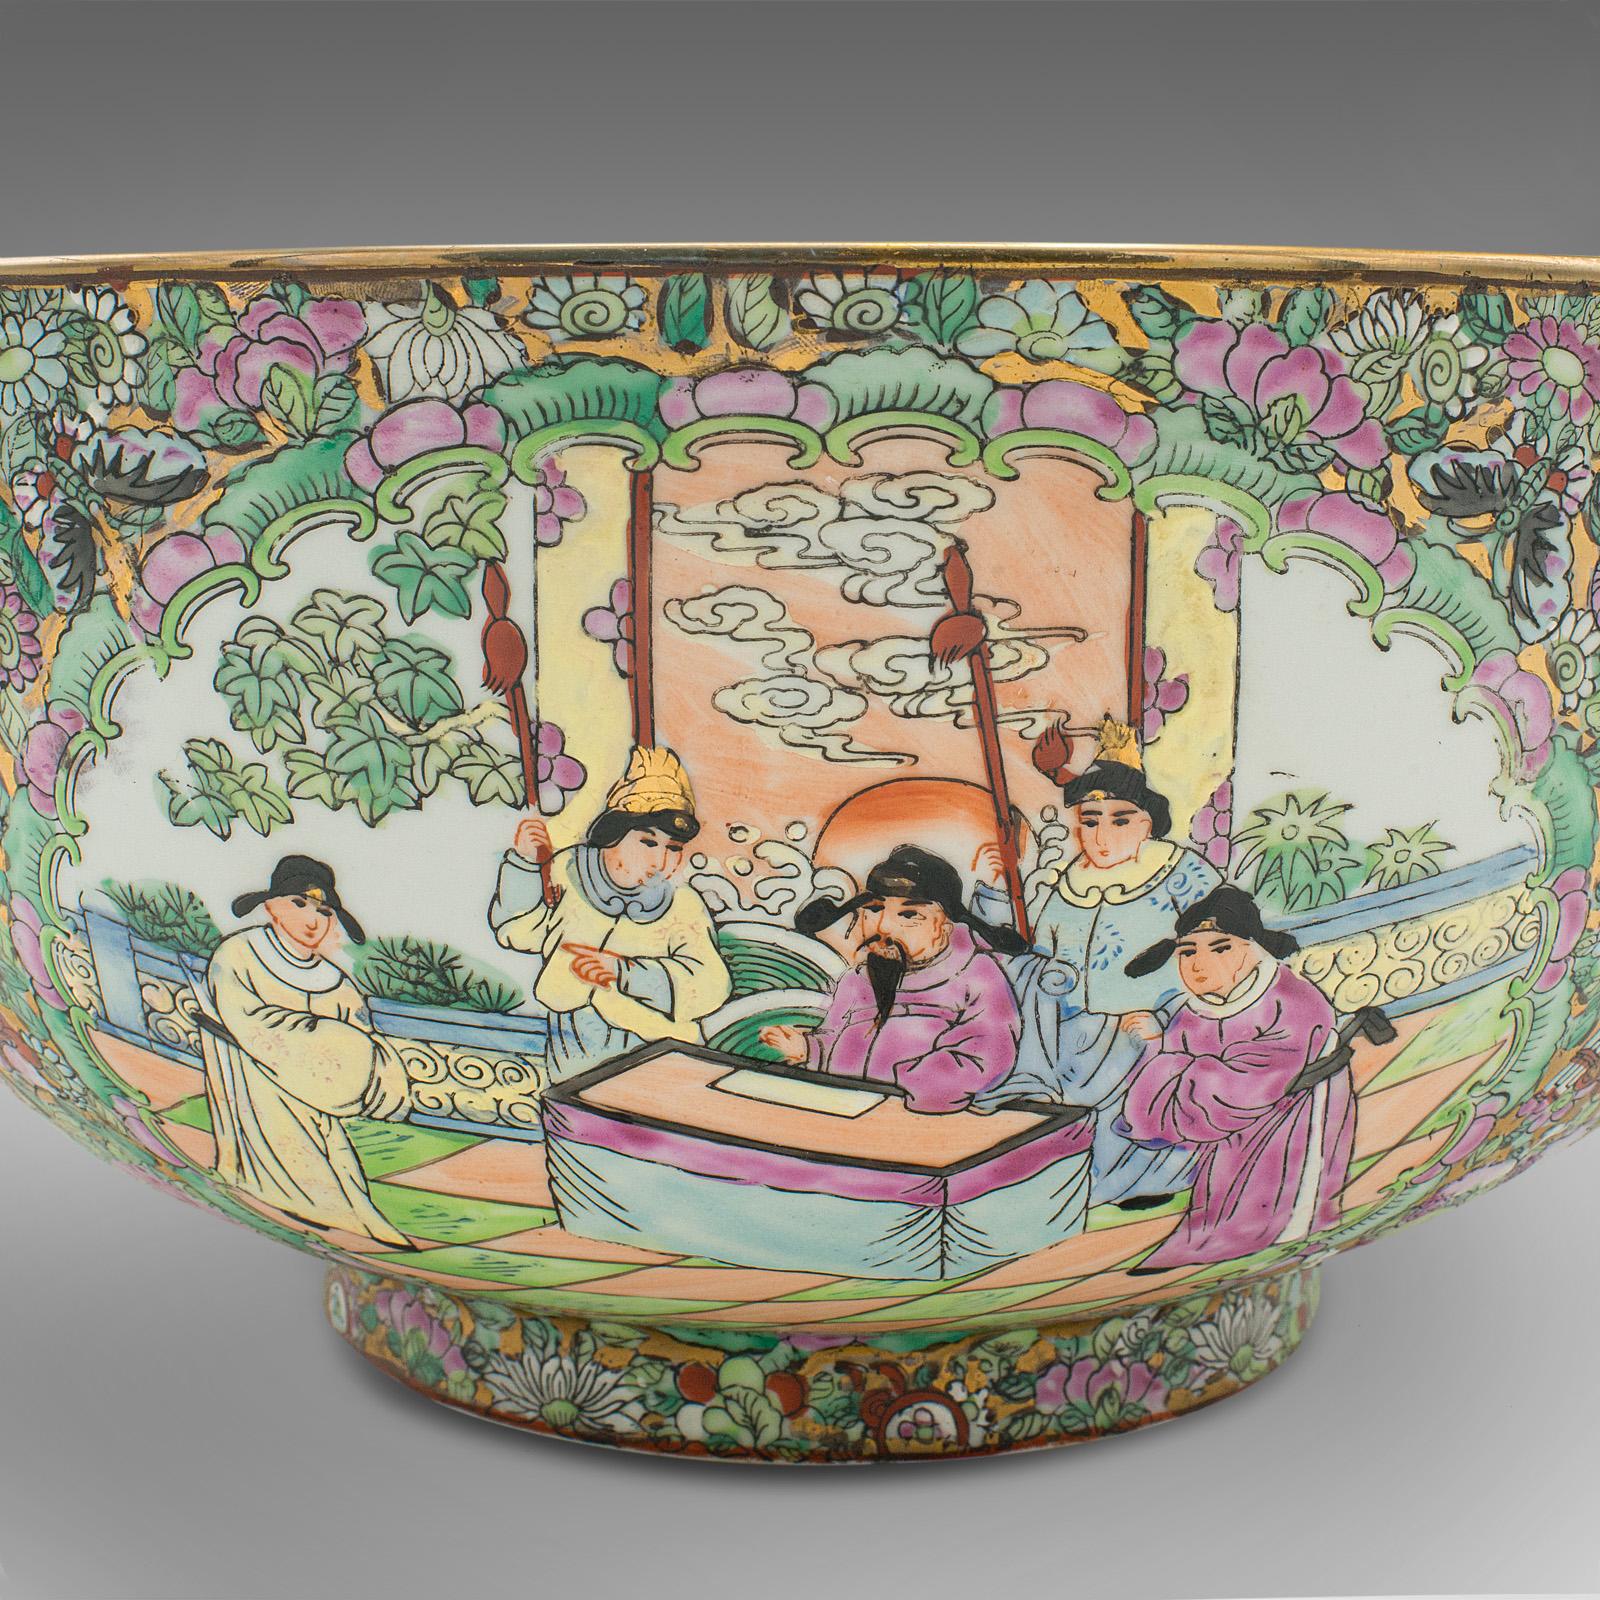 19th Century Large Antique Banquet Bowl, Chinese, Ceramic, Serving Dish, Qing, Late Victorian